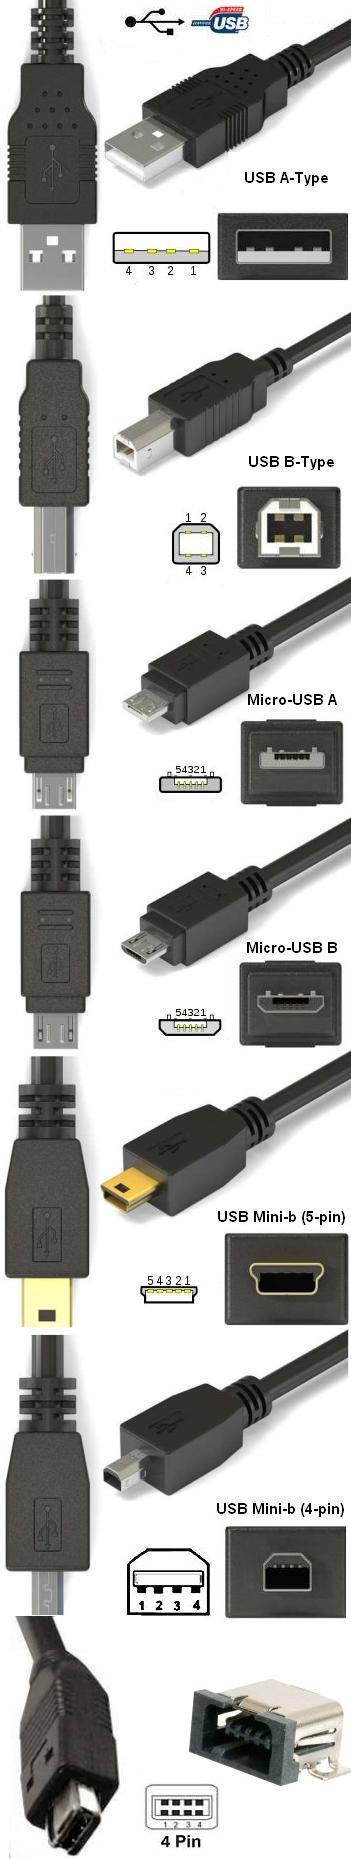 Cables specifications